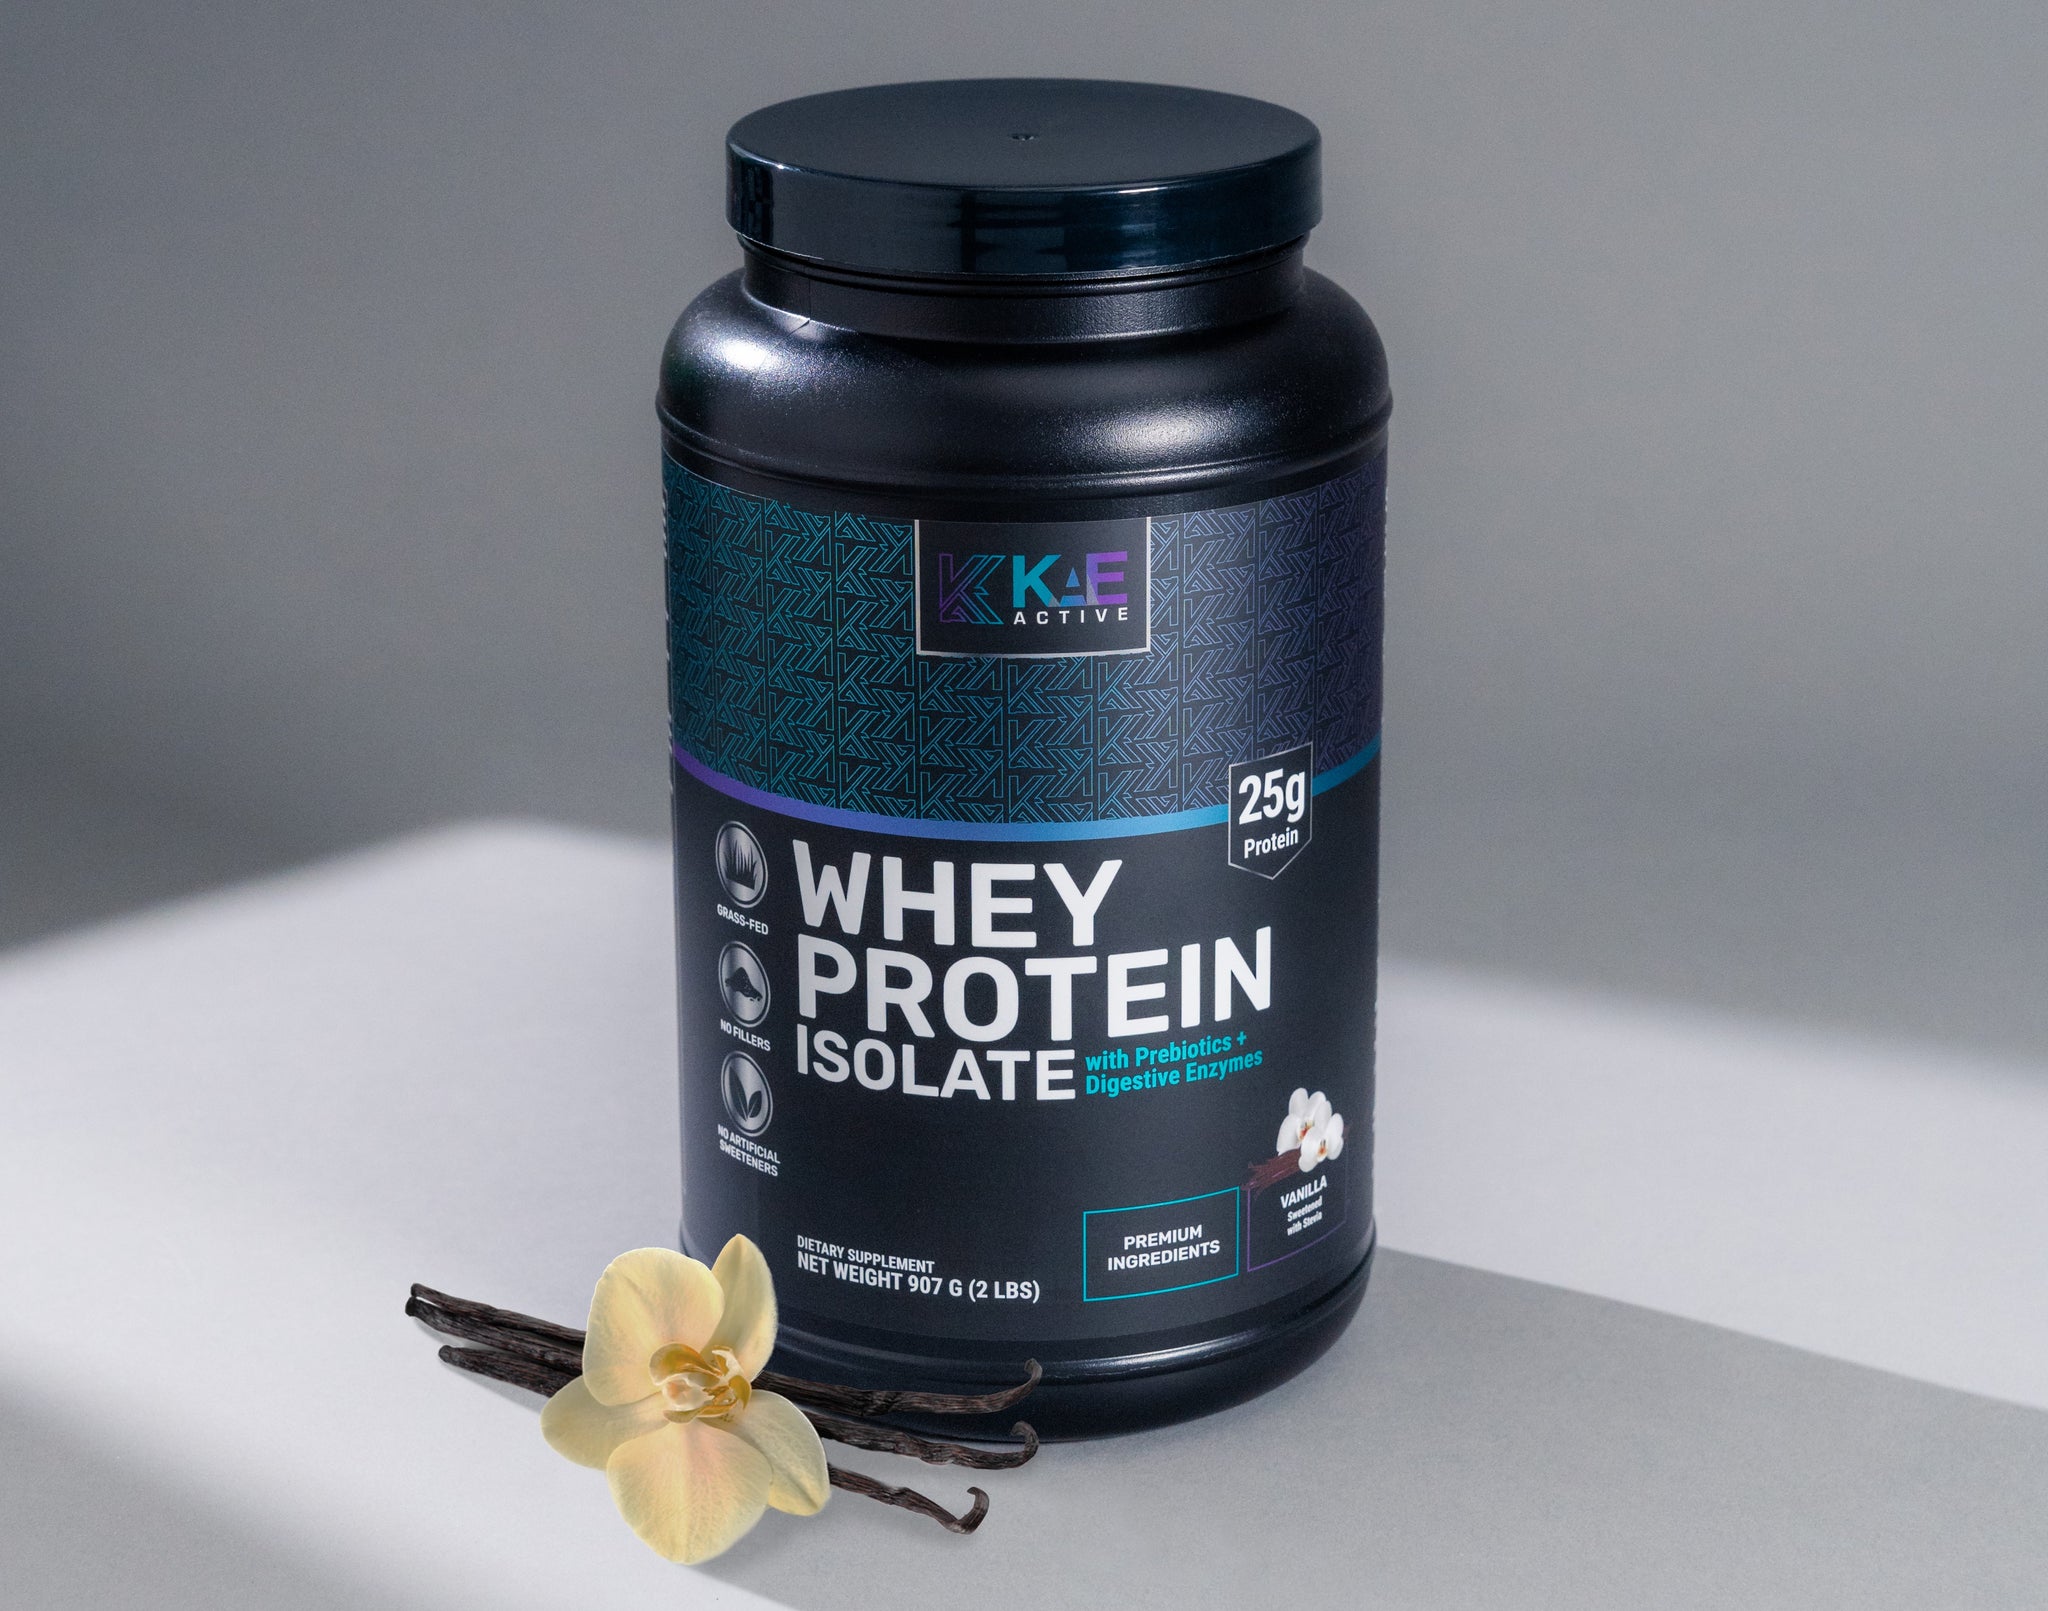 Key Features to Seek in Your Protein Powder